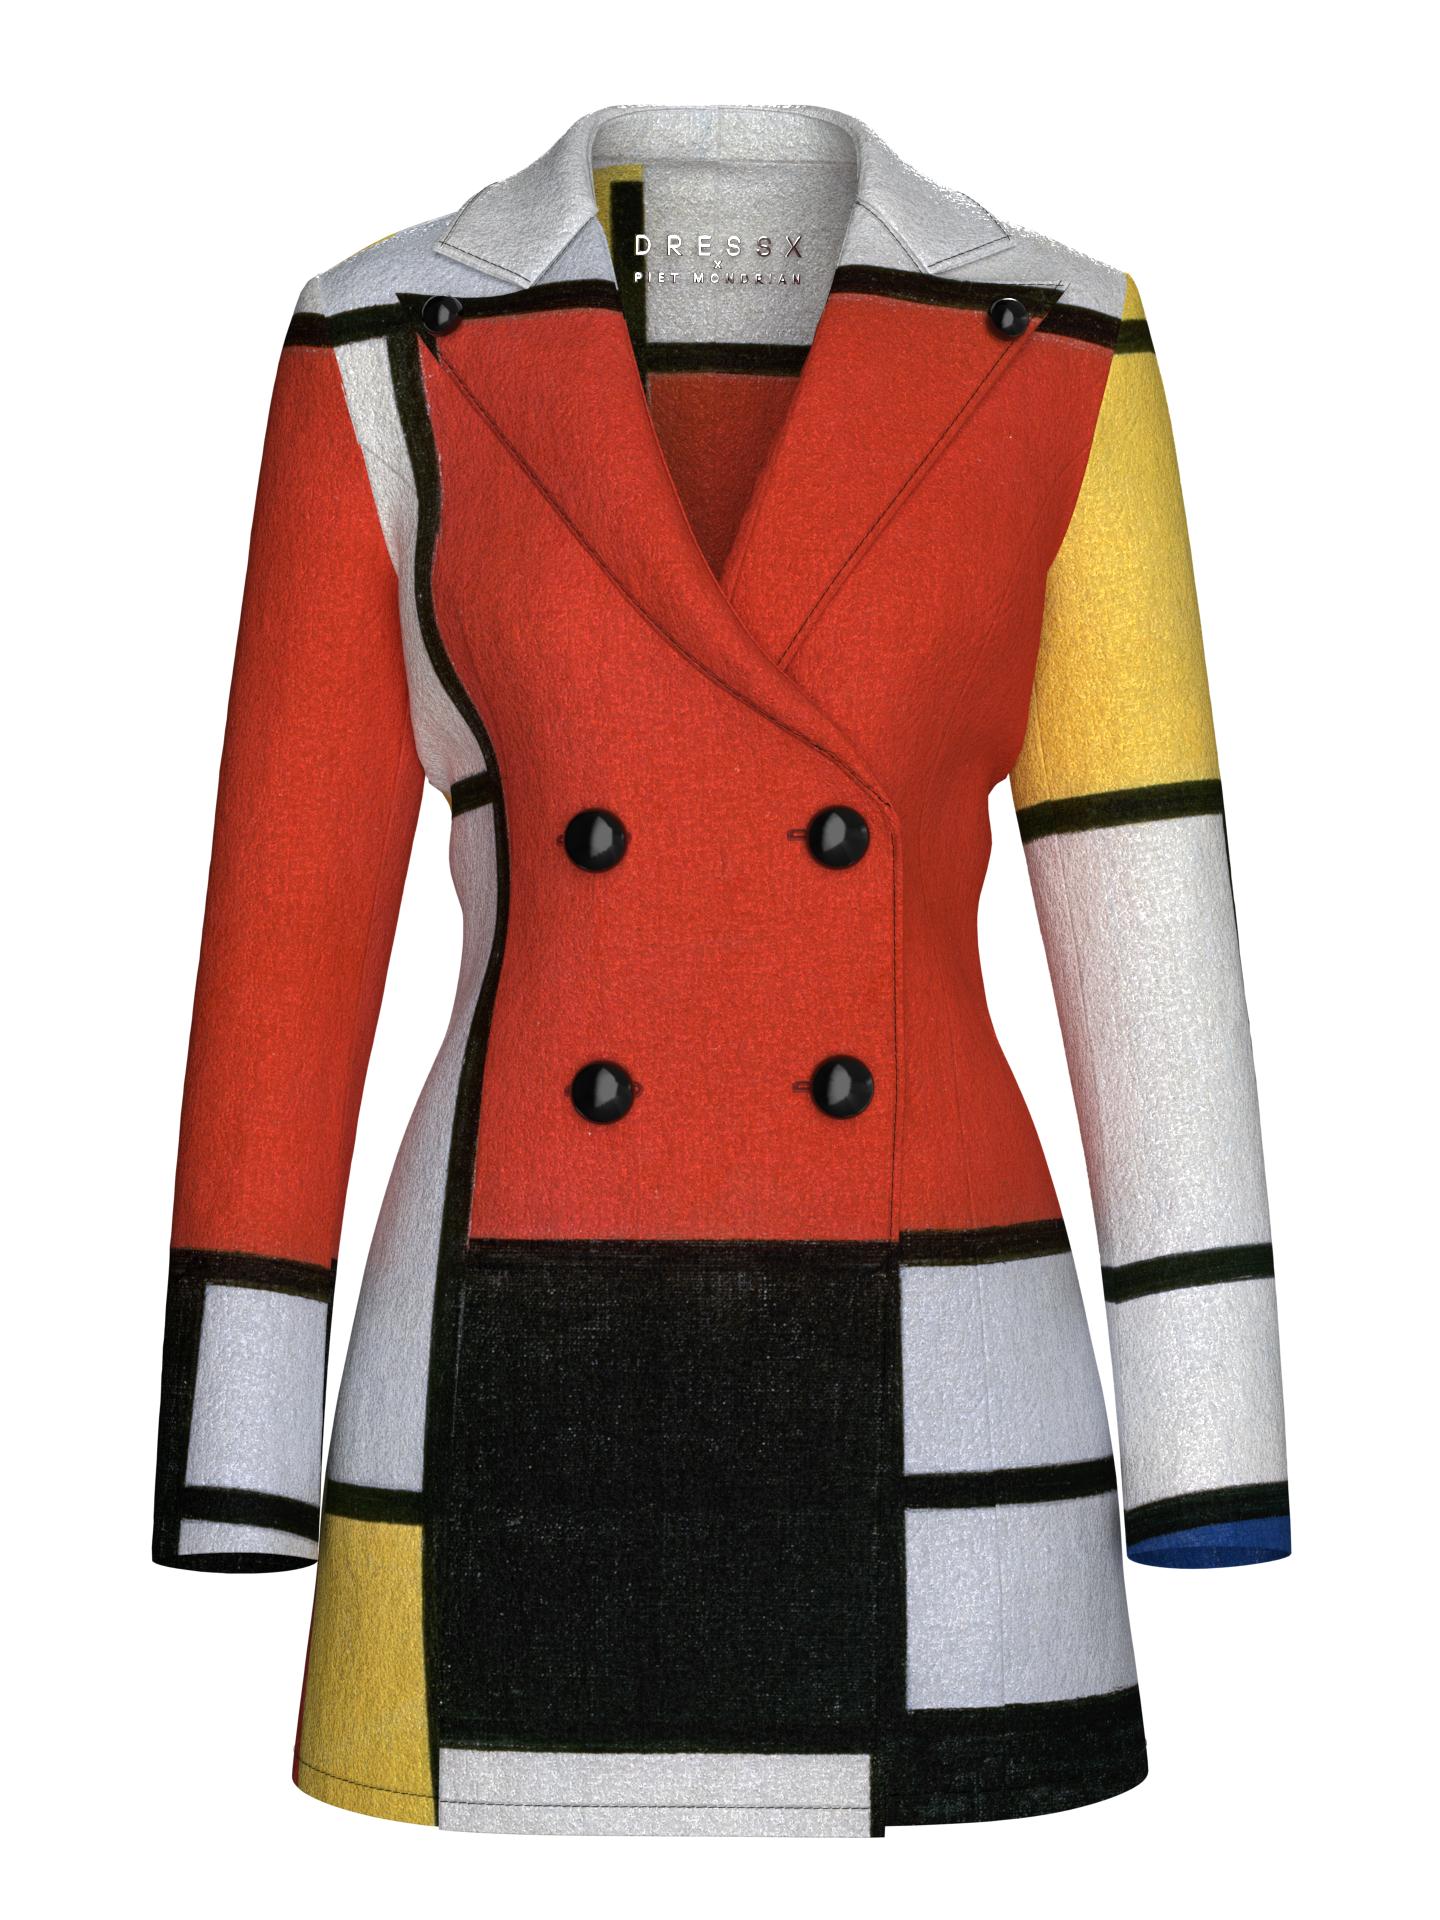 Blazer Dress-Composition with Red, Yellow, Blue and Black by DRESSX PIET MONDRIAN